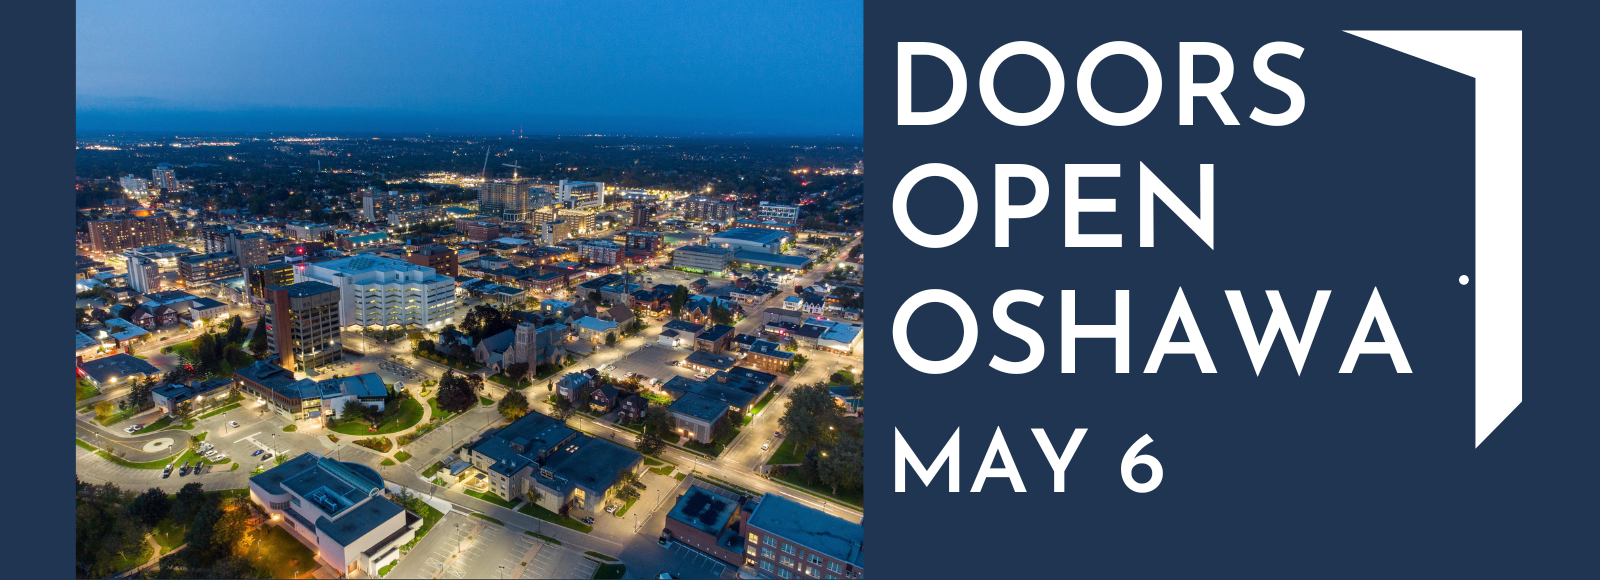 the city lit up at night with the words Doors Open May 6